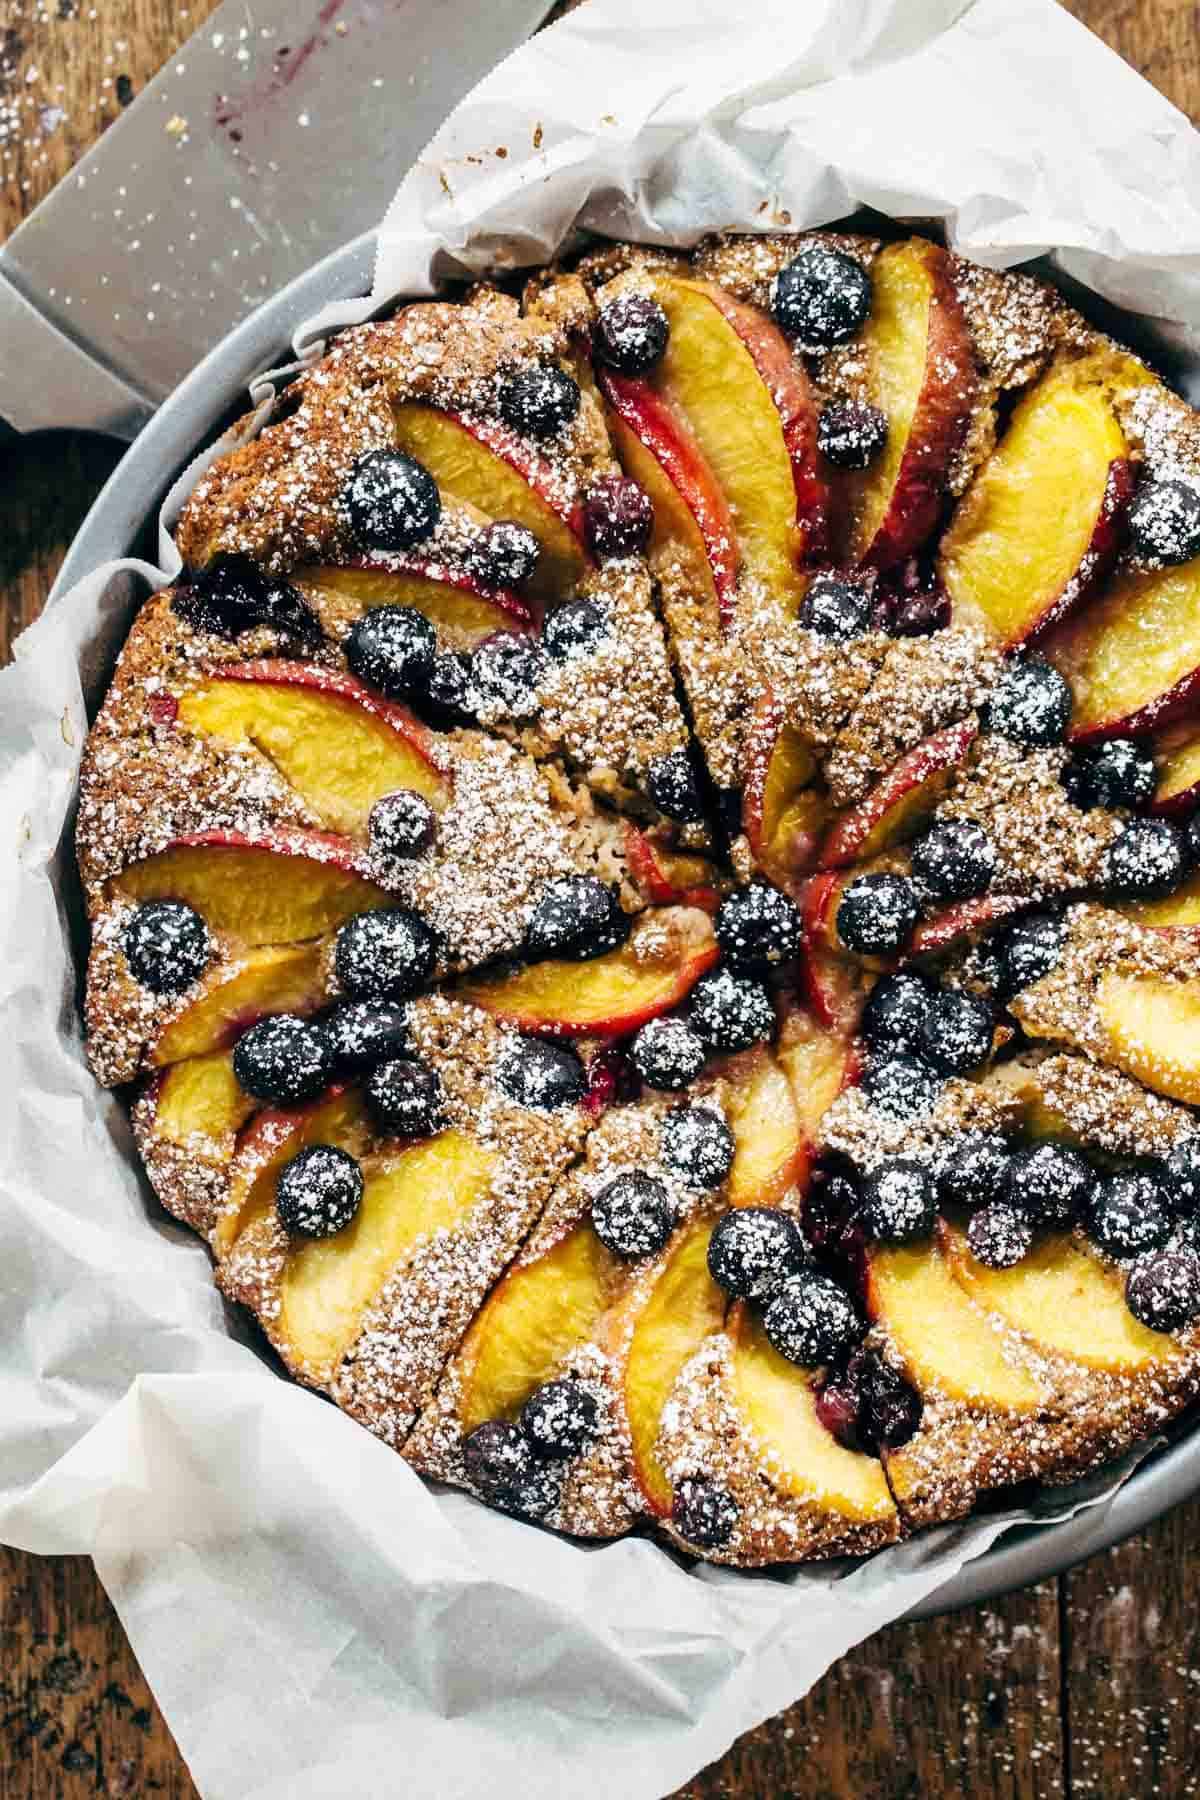 Blueberry Peach Cake recipe uses simple ingredients, whole wheat, no refined sugar, and has a STUNNING presentation. YUM! | pinchofyum.com